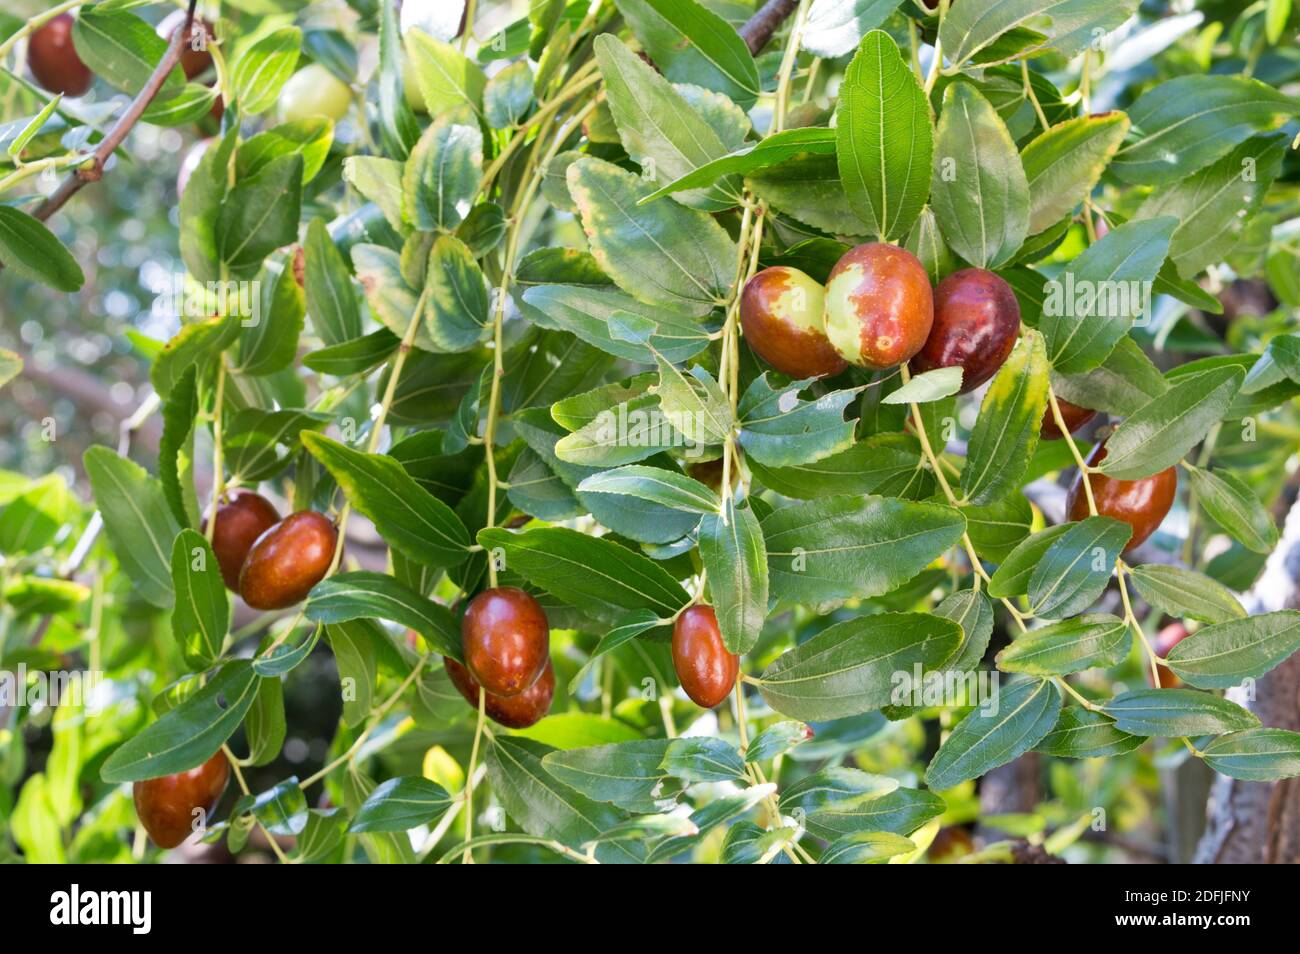 Mediterranean jujube tree with ripe fruits, ready for harvest, Ziziphus jujuba, called chinese date or red date, from Dalmatia, Croatia Stock Photo